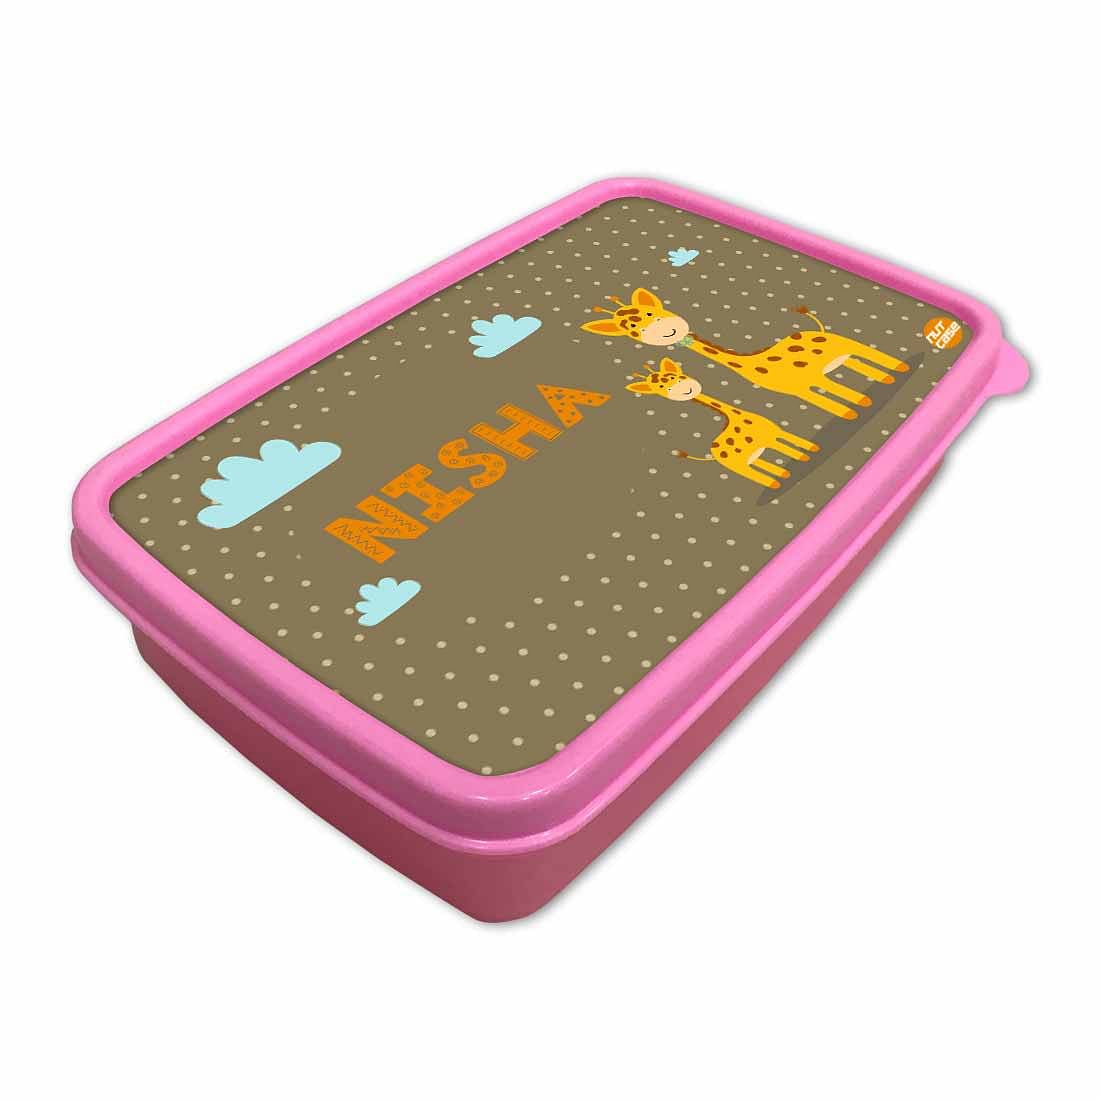 Personalized Snack Box for Kids Plastic Lunch Box for Girls -Zebra & Clouds Nutcase